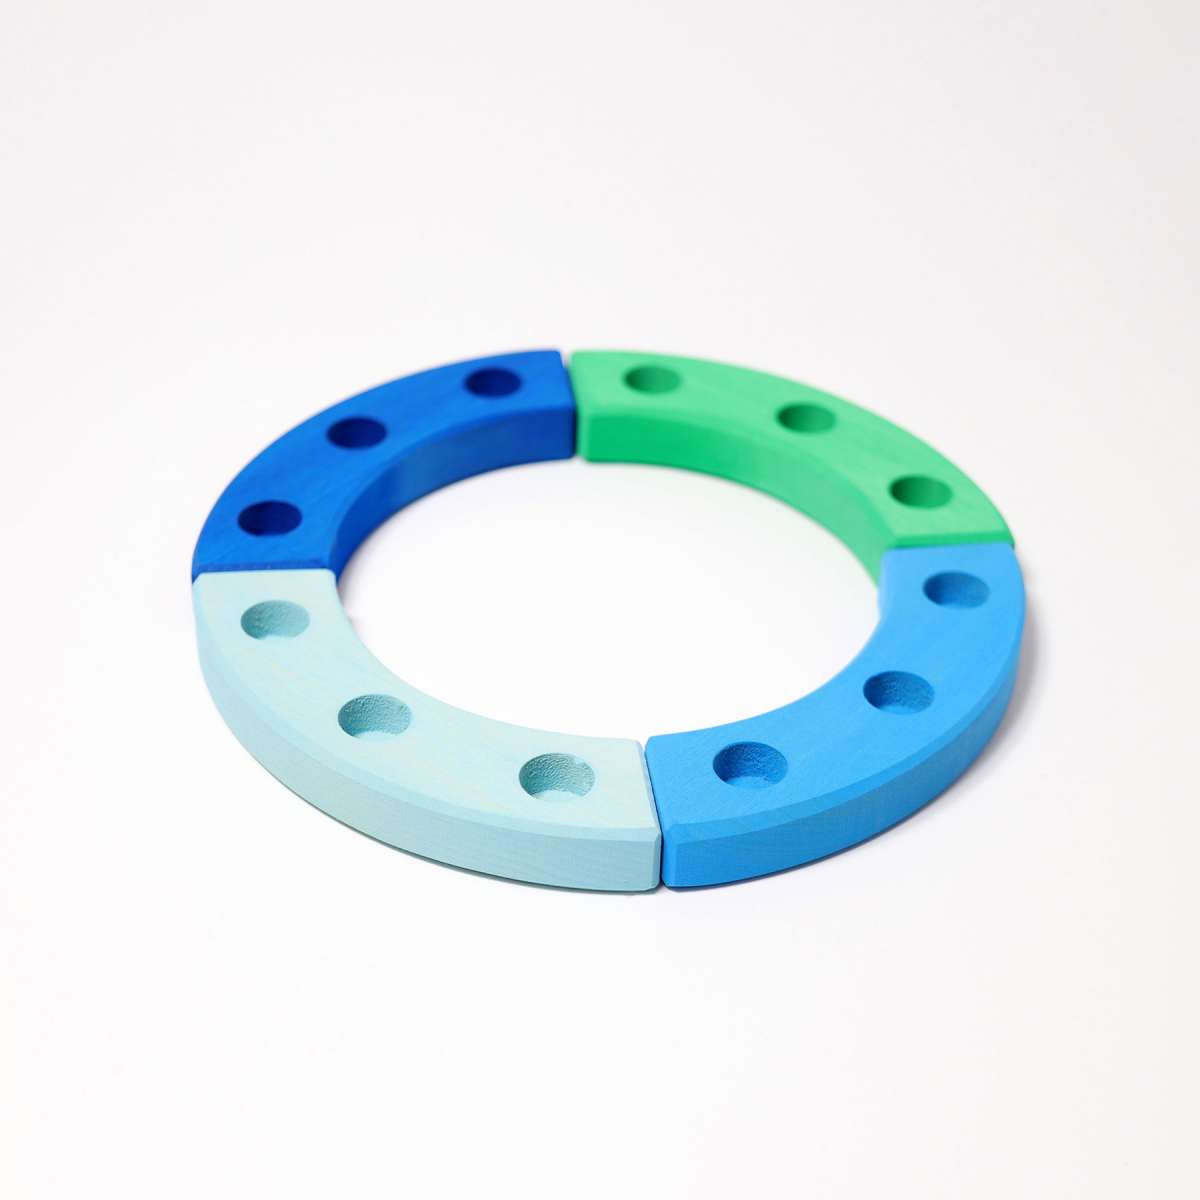 02062 Grimm's Small Birthday Ring Blue-Green 12 Holes